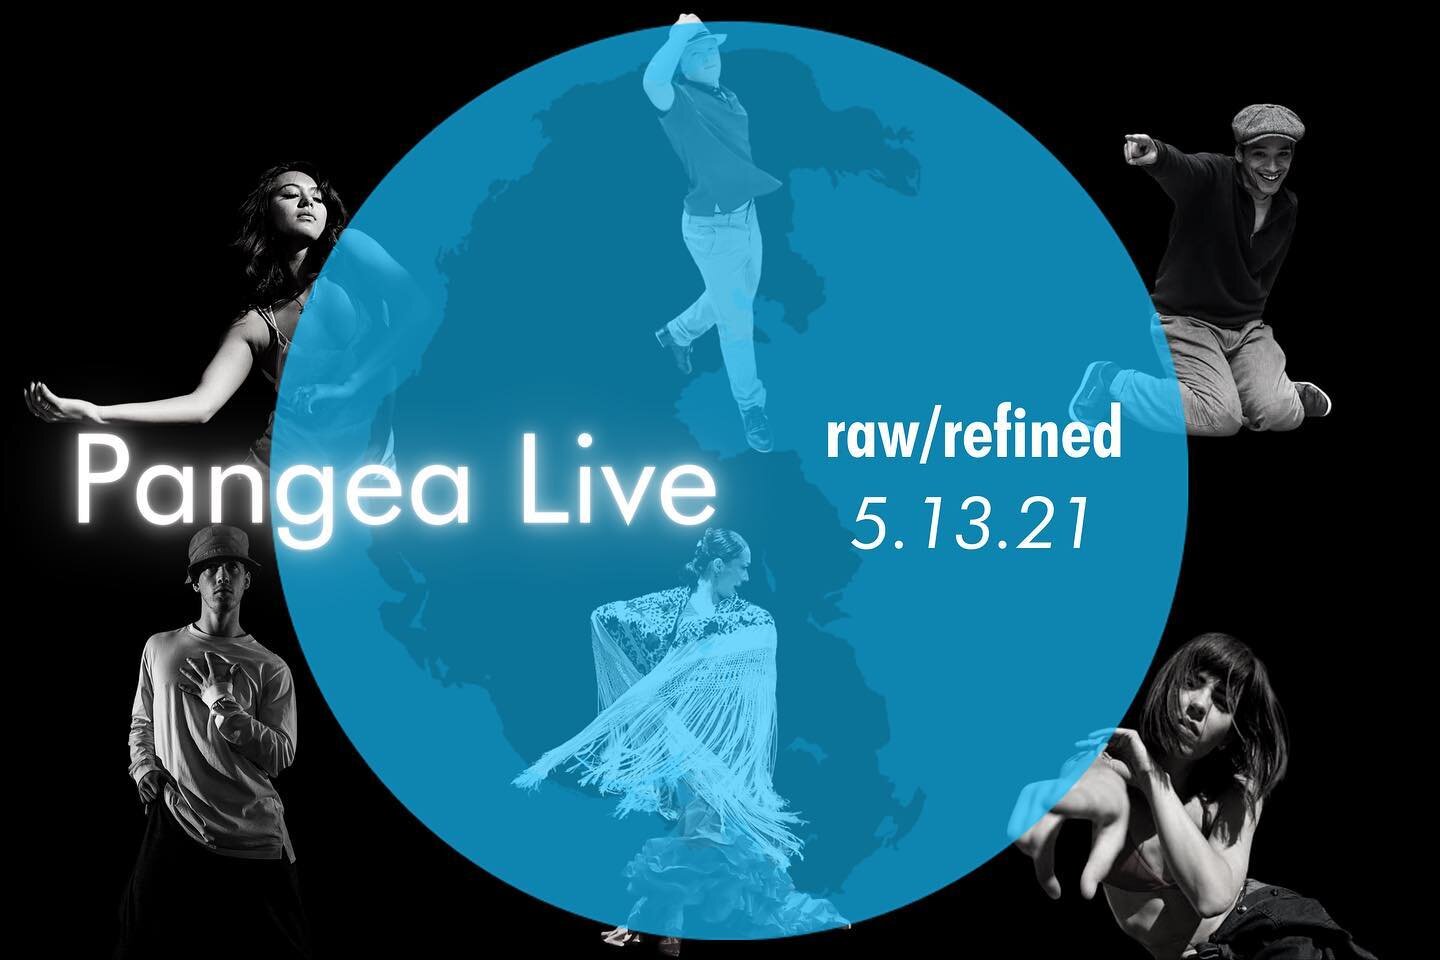 Check out this FANTASTIC live show via zoom tonight of several professional performing artists and a featured youth tap dancer 😉 performing live on @pangea_live link in bio to order your tickets #movementcenterla 🖤 #art #inmotion